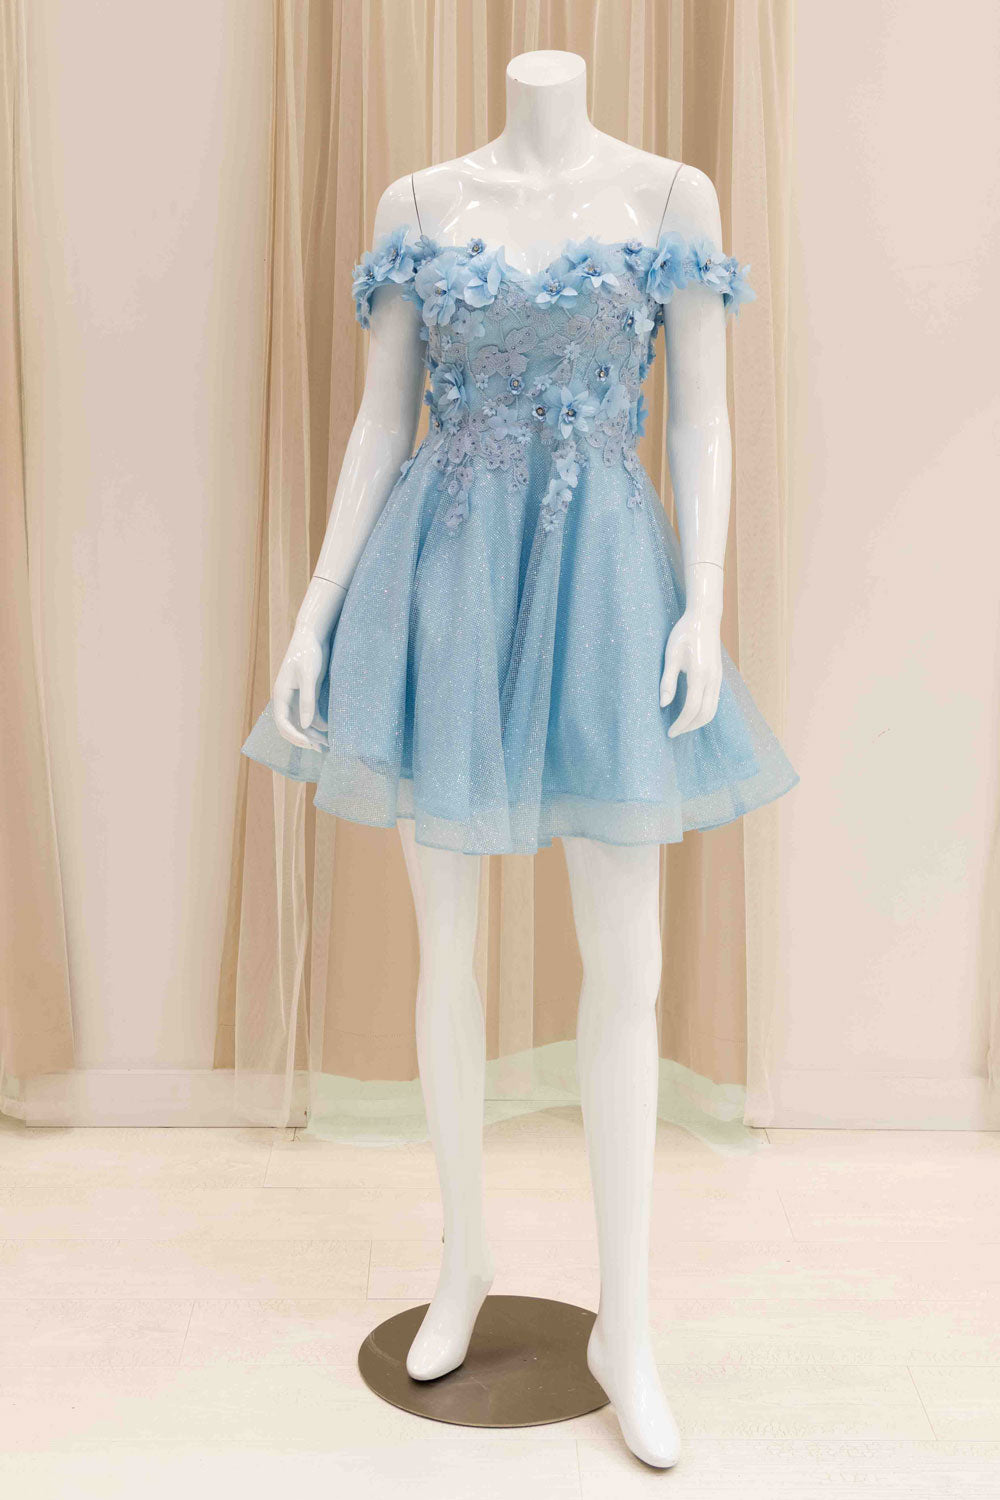 Light Blue Short Formal Fit and Flare Dress for 8th Grade Dance